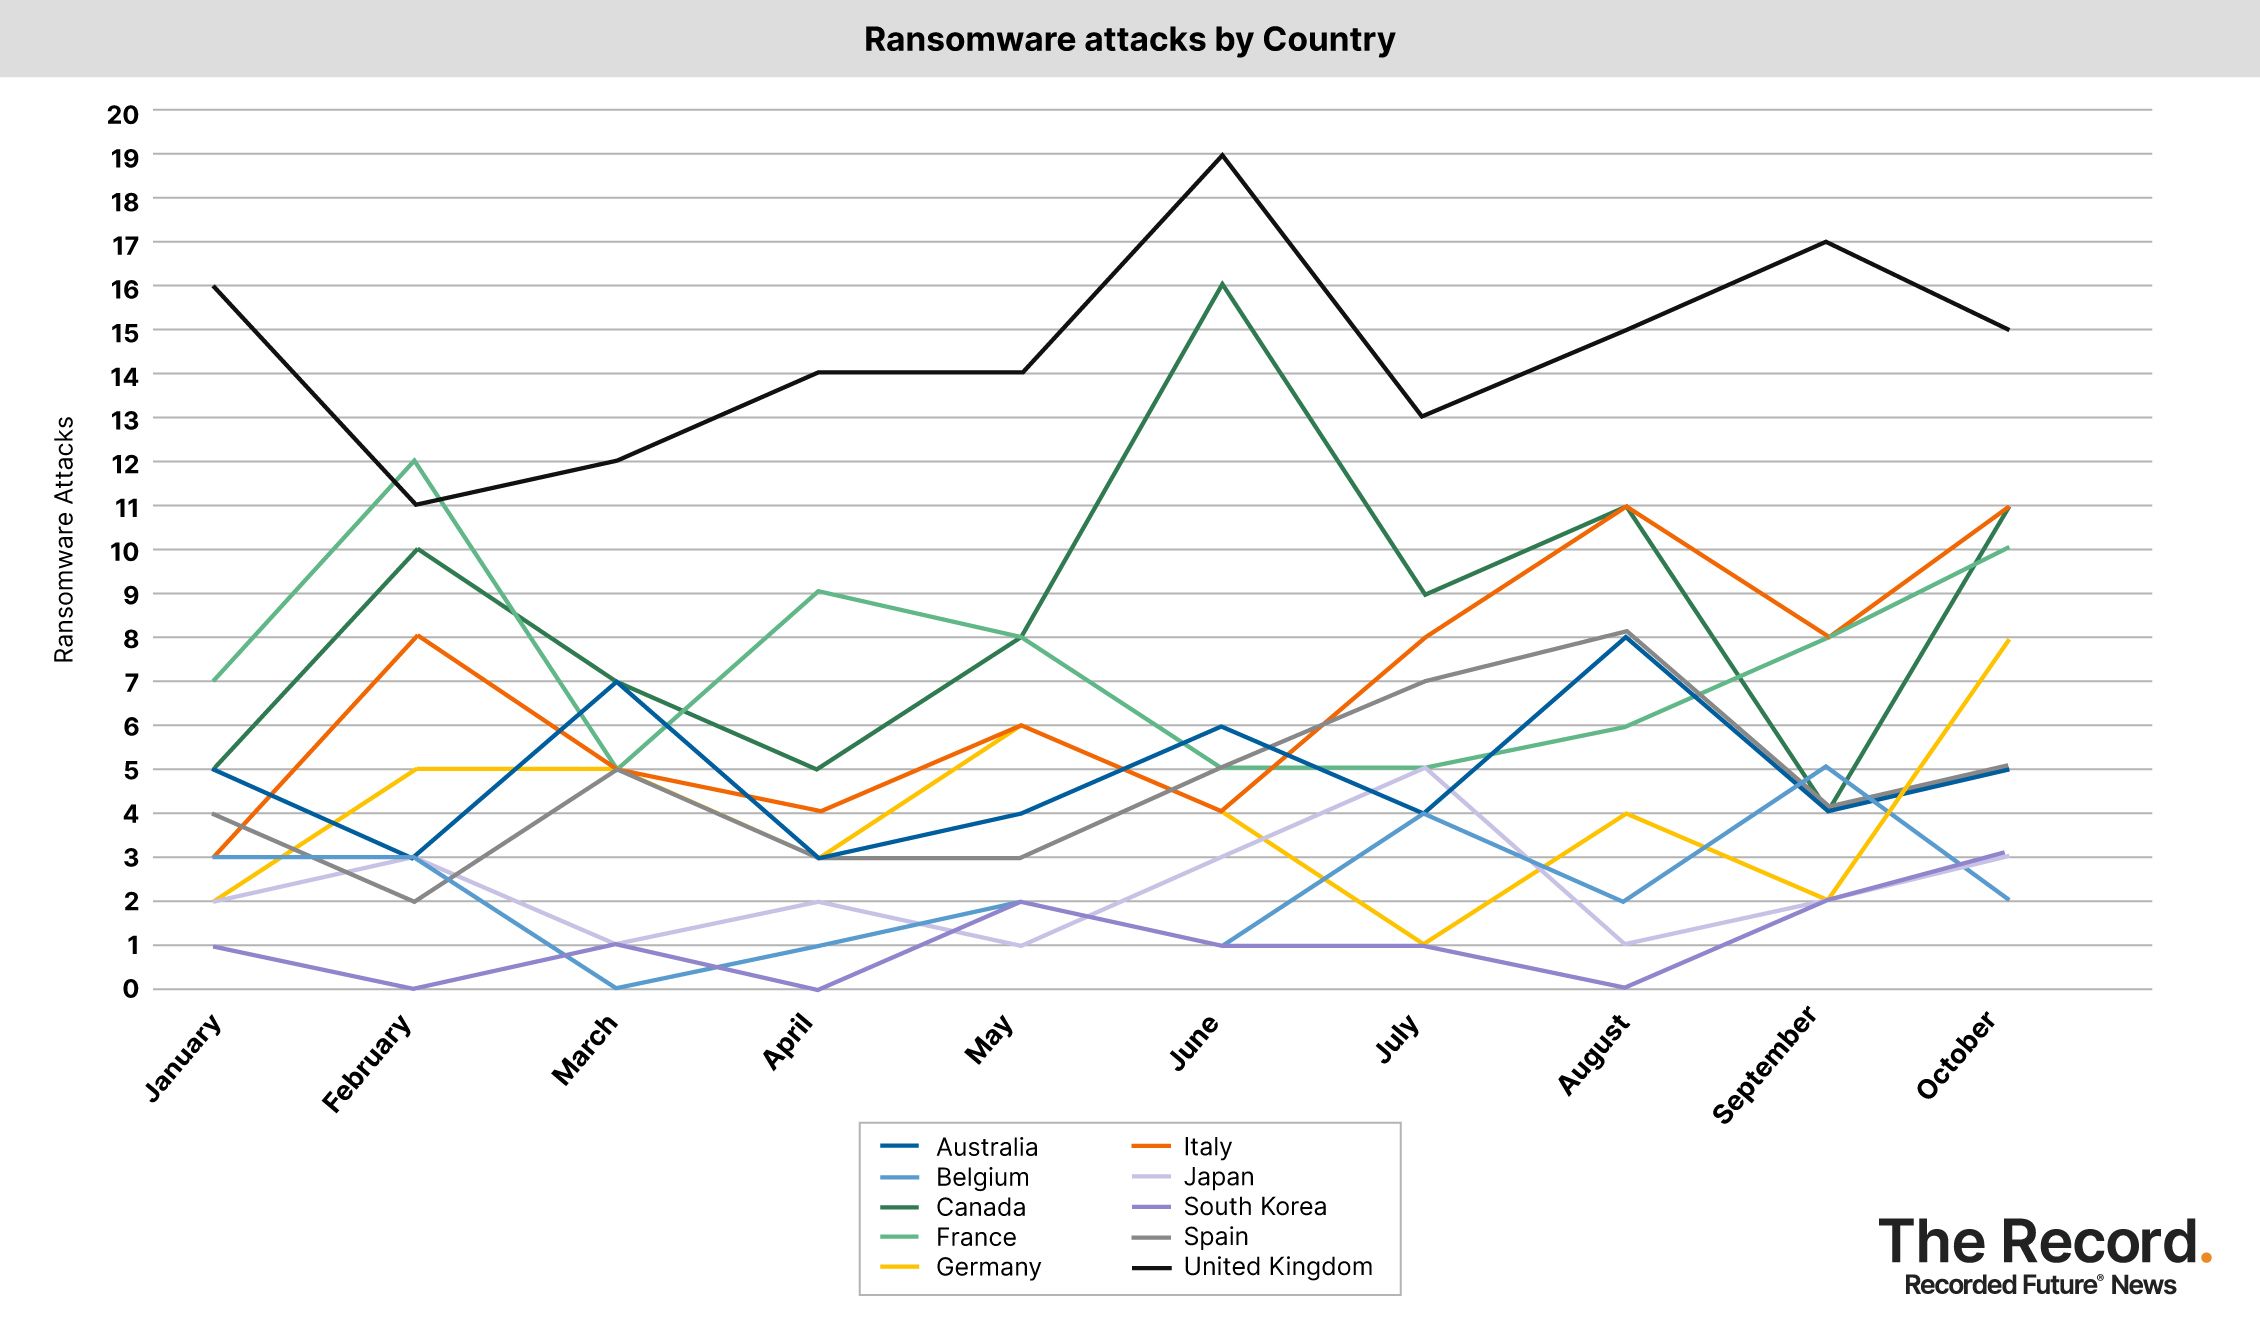 2023_1114 - Ransomware attacks by country (10 countries).jpg